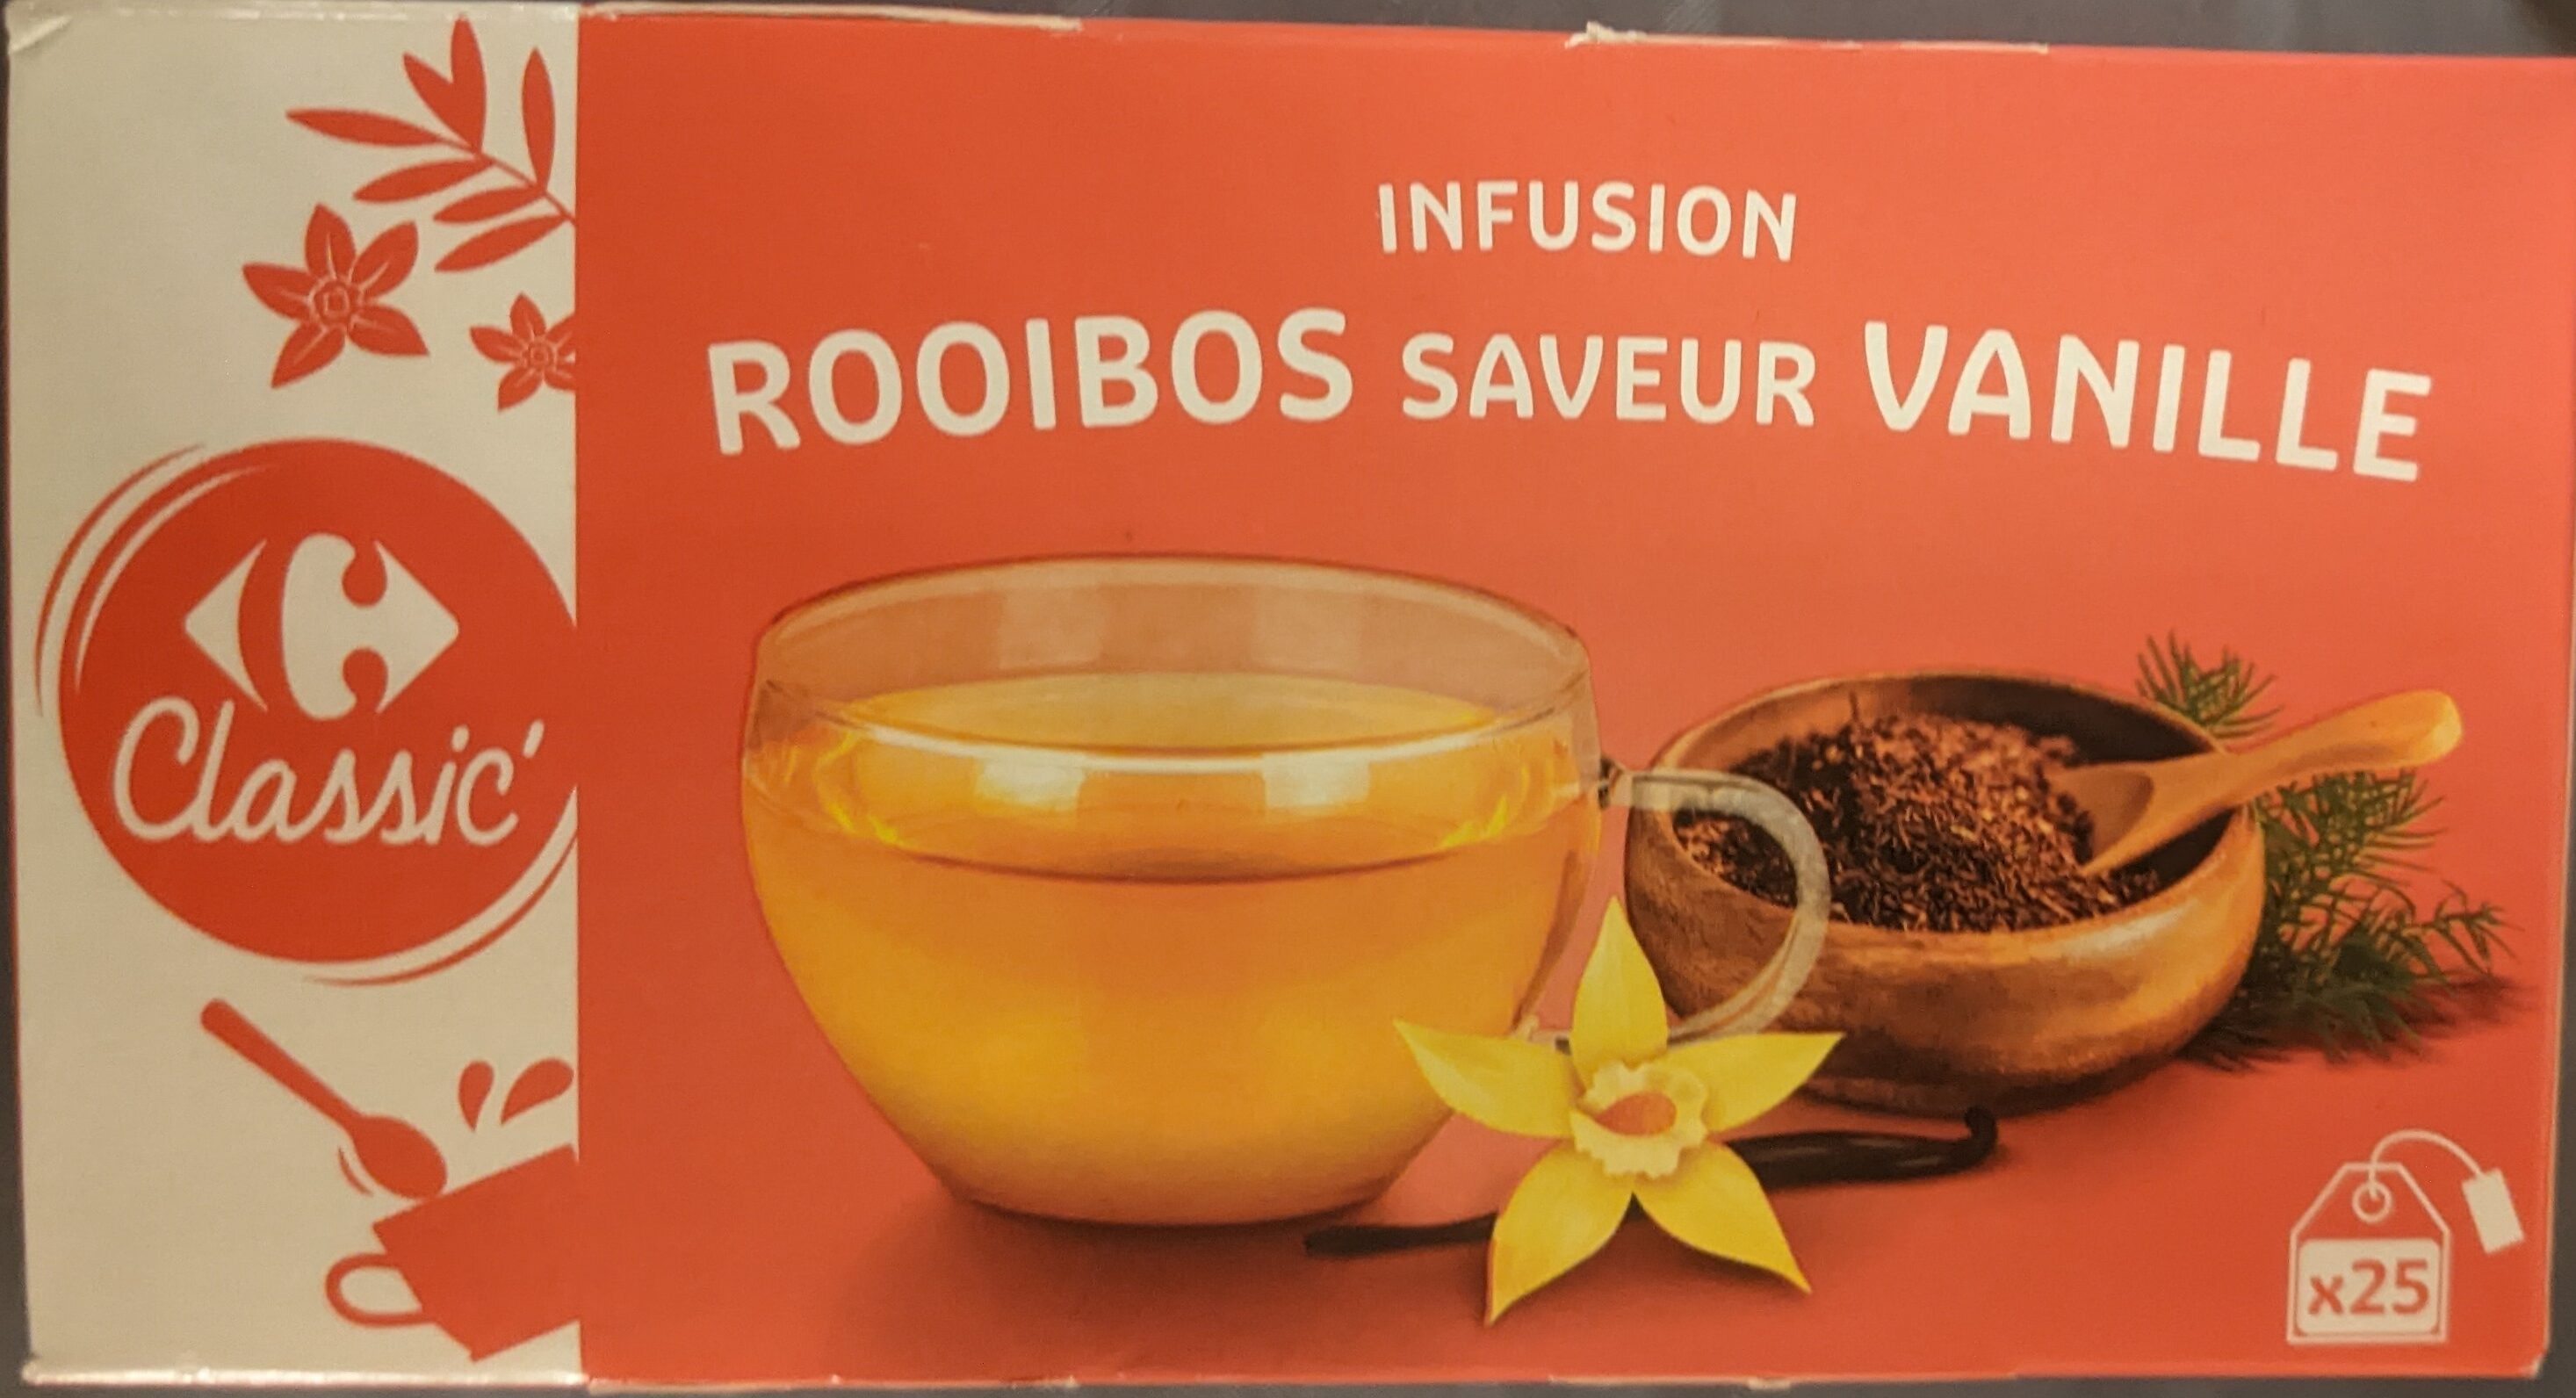 Infusion rooibos saveur vanille - Prodotto - fr